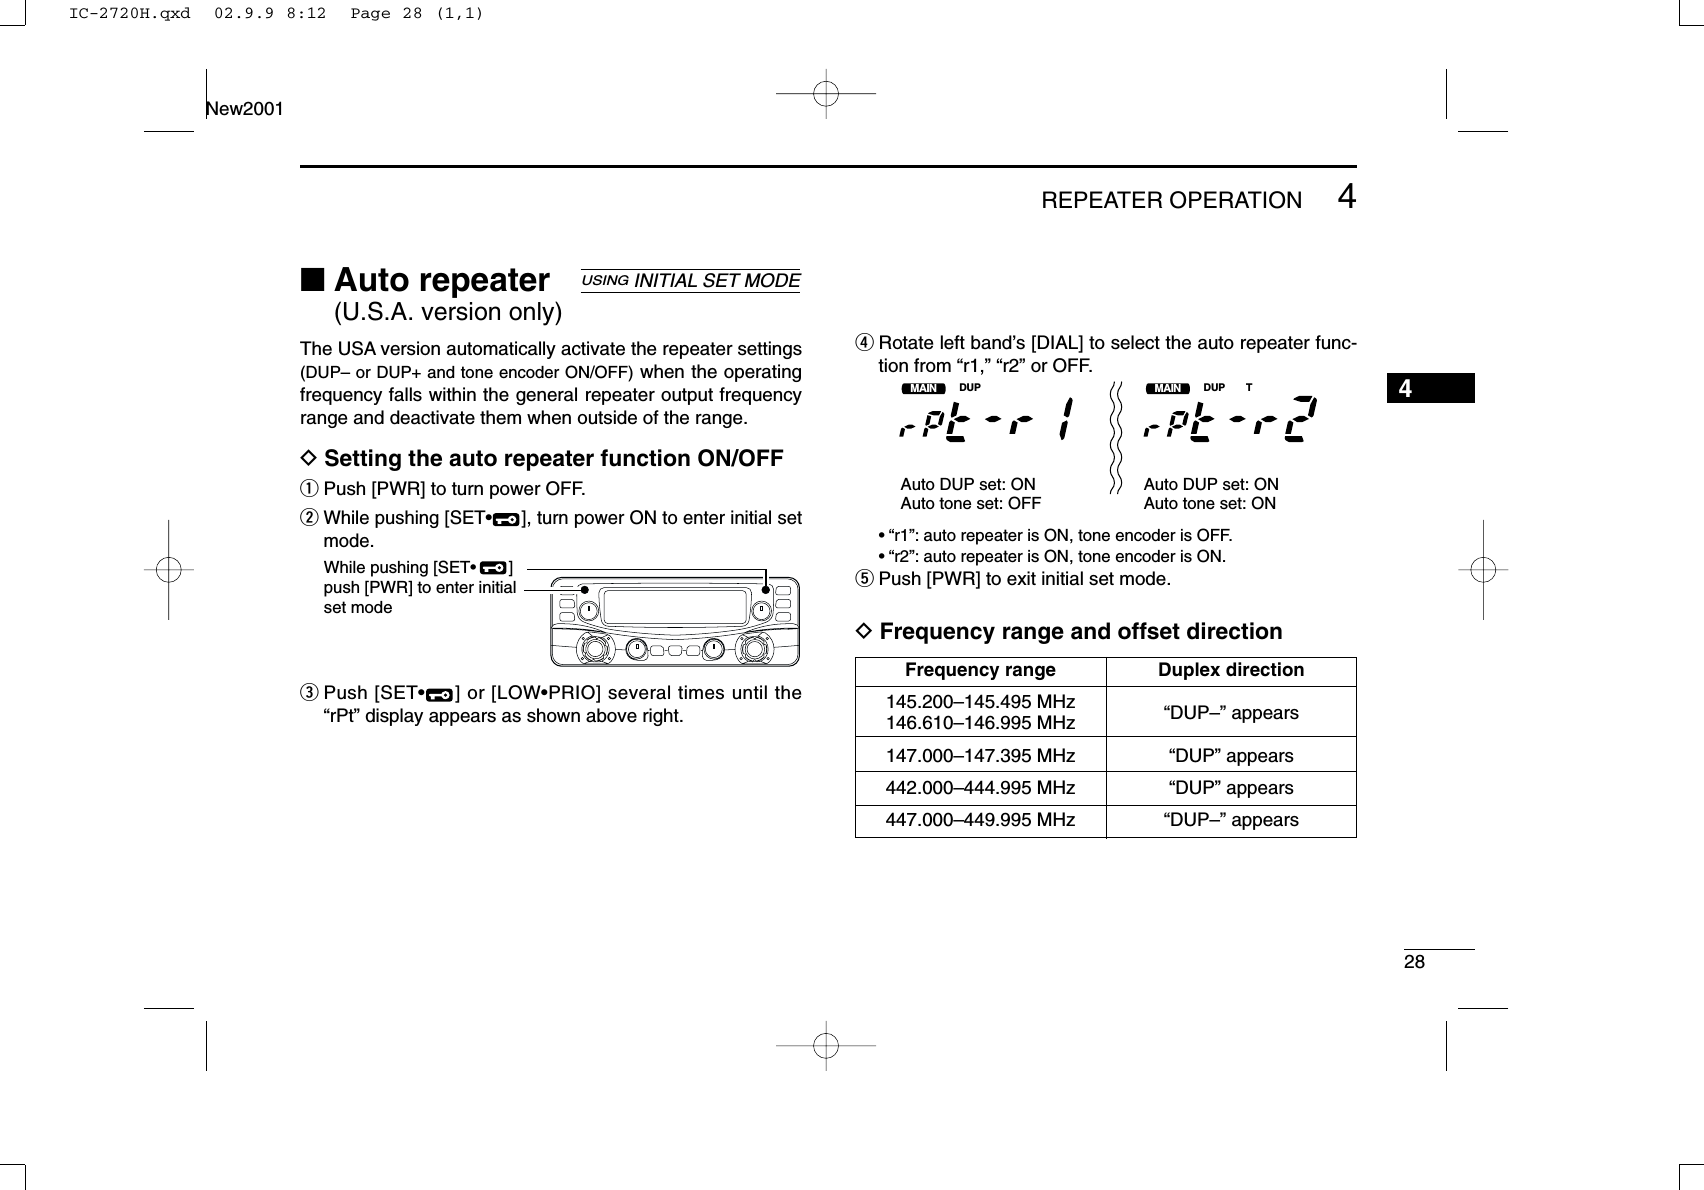 284REPEATER OPERATIONNew20014■Auto repeater (U.S.A. version only)The USA version automatically activate the repeater settings(DUP– or DUP+ and tone encoder ON/OFF) when the operatingfrequency falls within the general repeater output frequencyrange and deactivate them when outside of the range.DSetting the auto repeater function ON/OFFqPush [PWR] to turn power OFF.wWhile pushing [SET•], turn power ON to enter initial setmode.ePush [SET•] or [LOW•PRIO] several times until the“rPt” display appears as shown above right.rRotate left band’s [DIAL] to select the auto repeater func-tion from “r1,” “r2” or OFF.•“r1”: auto repeater is ON, tone encoder is OFF.•“r2”: auto repeater is ON, tone encoder is ON.tPush [PWR] to exit initial set mode.DFrequency range and offset directionMAINT  XDUPMMAINT  XDUP TMAuto DUP set: ONAuto tone set: OFFAuto DUP set: ONAuto tone set: ONWhile pushing [SET•       ]push [PWR] to enter initial set modeUSINGINITIAL SET MODEFrequency range Duplex direction145.200–145.495 MHz “DUP–” appears146.610–146.995 MHz147.000–147.395 MHz “DUP” appears442.000–444.995 MHz “DUP” appears447.000–449.995 MHz “DUP–” appearsIC-2720H.qxd  02.9.9 8:12  Page 28 (1,1)